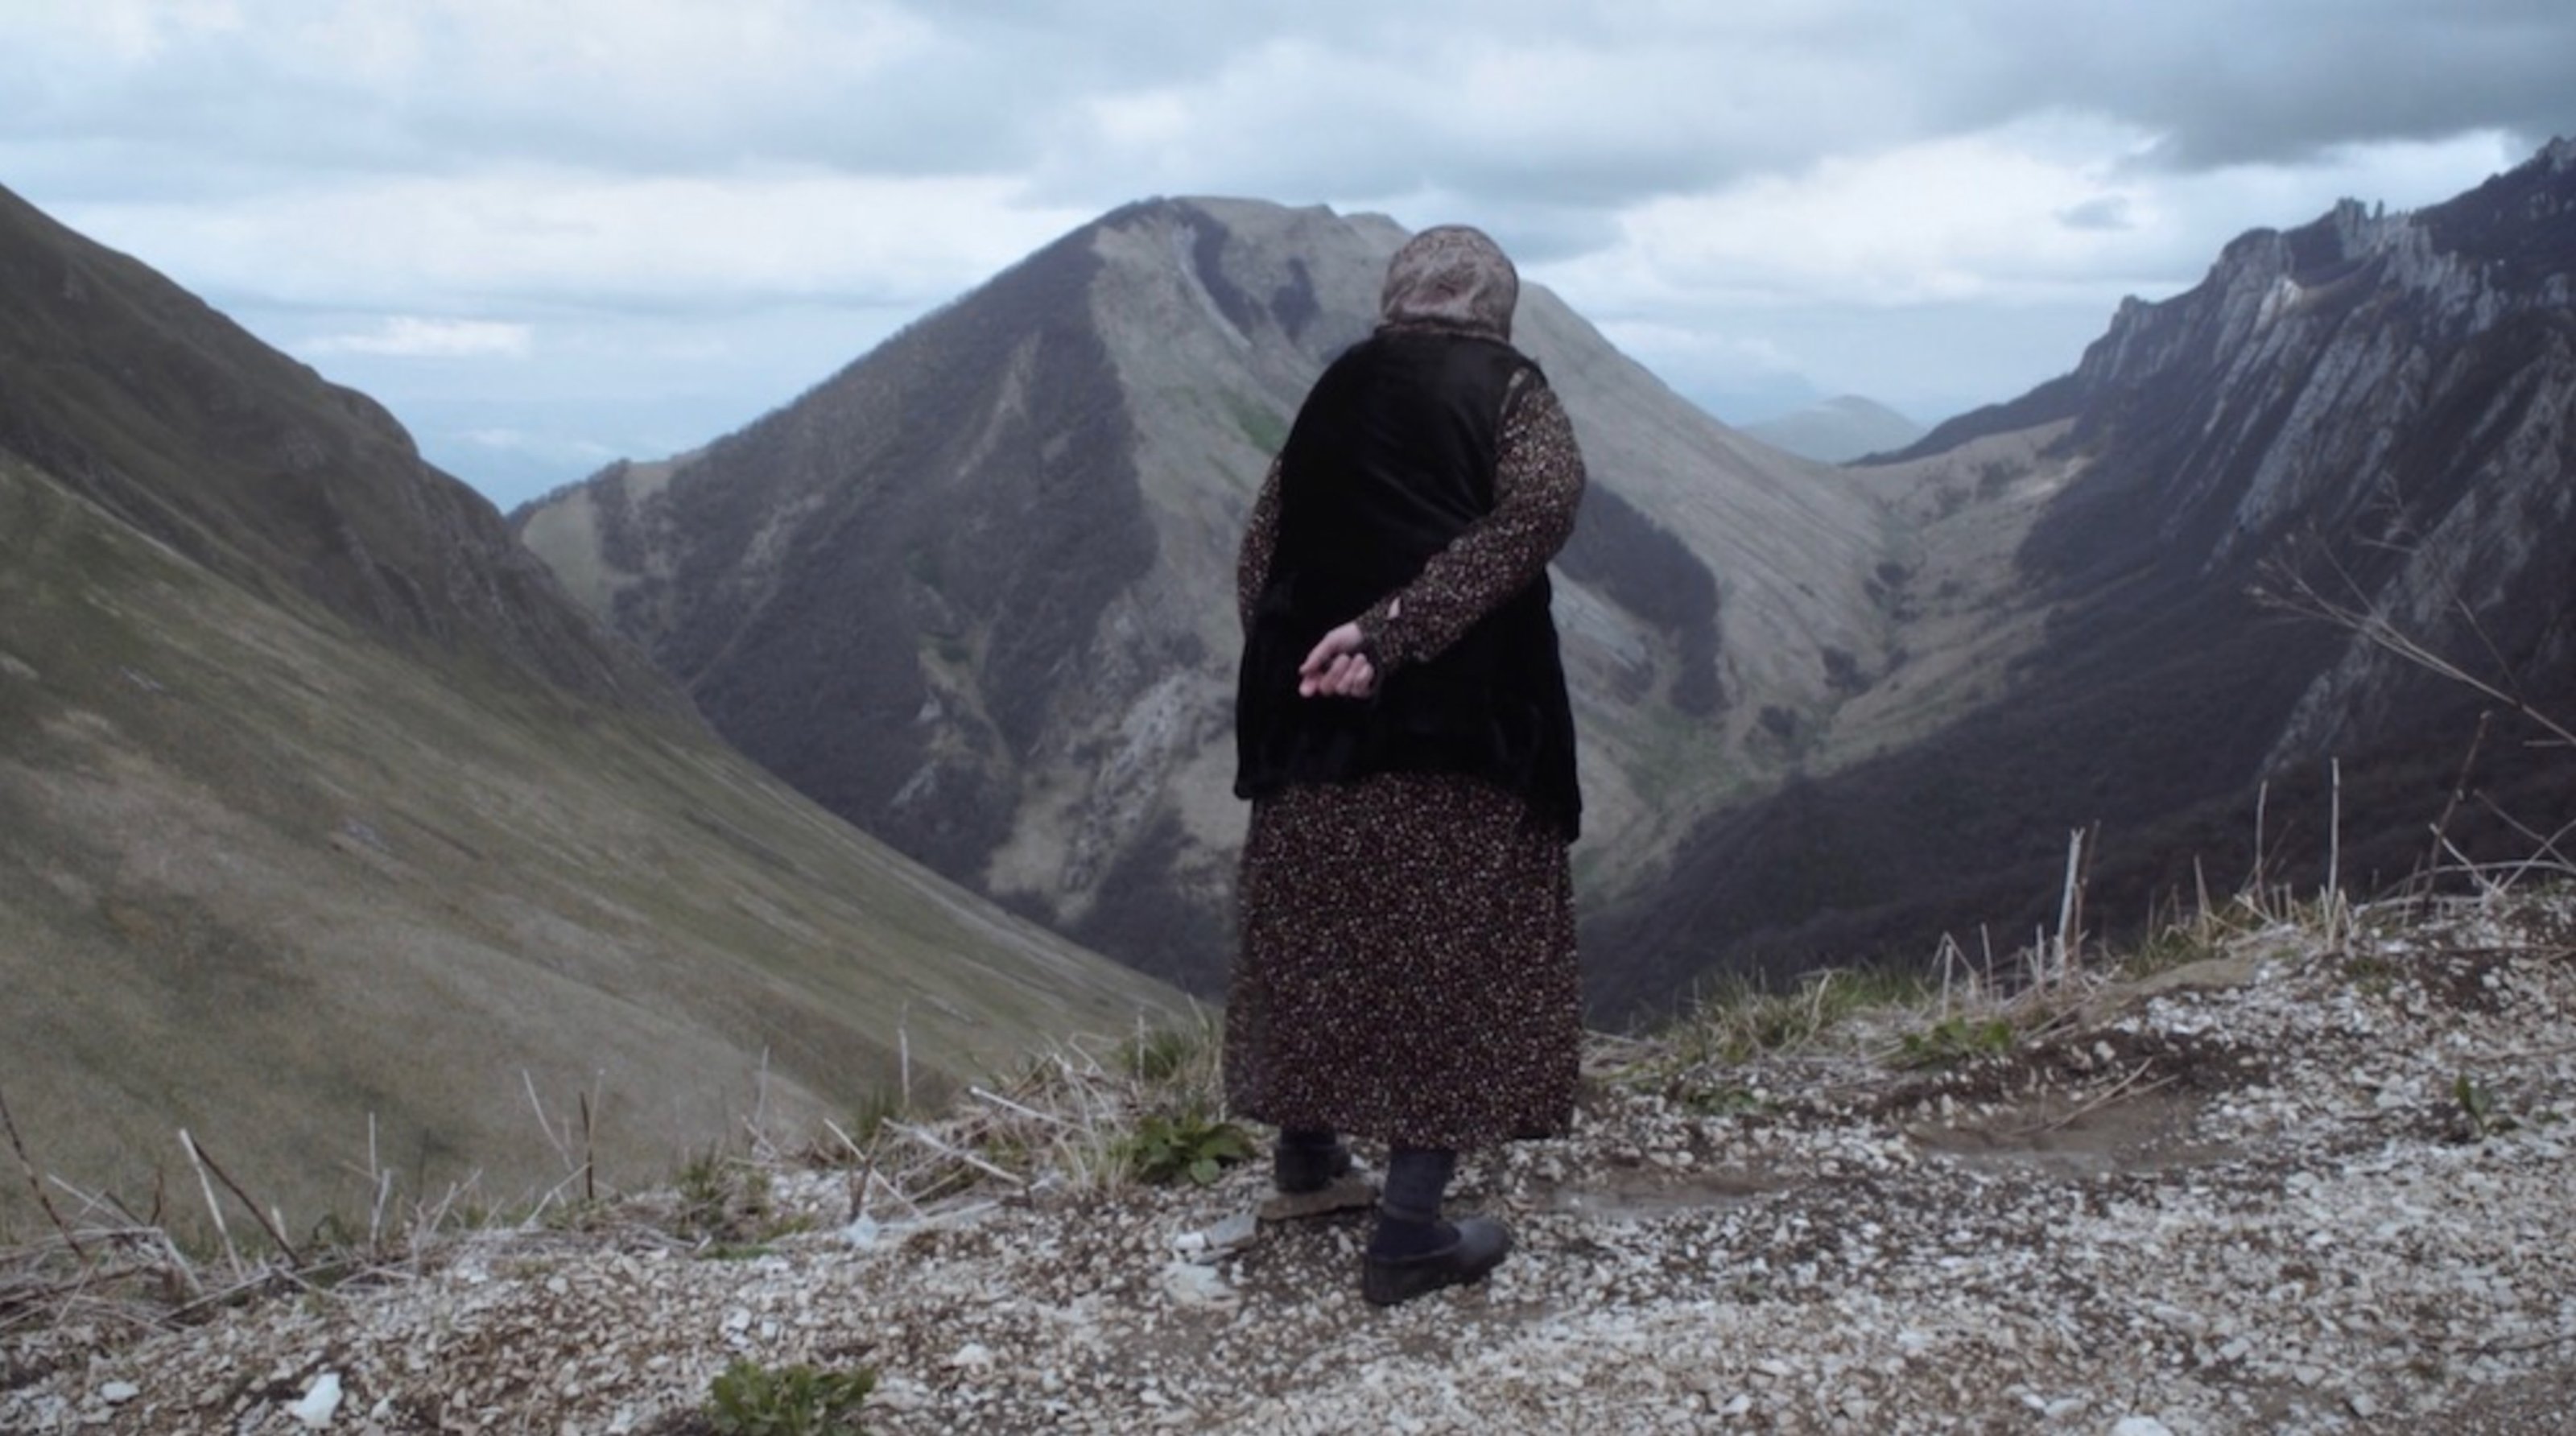 The artist's grandmother stands on a hill in the North Caucasus mountains